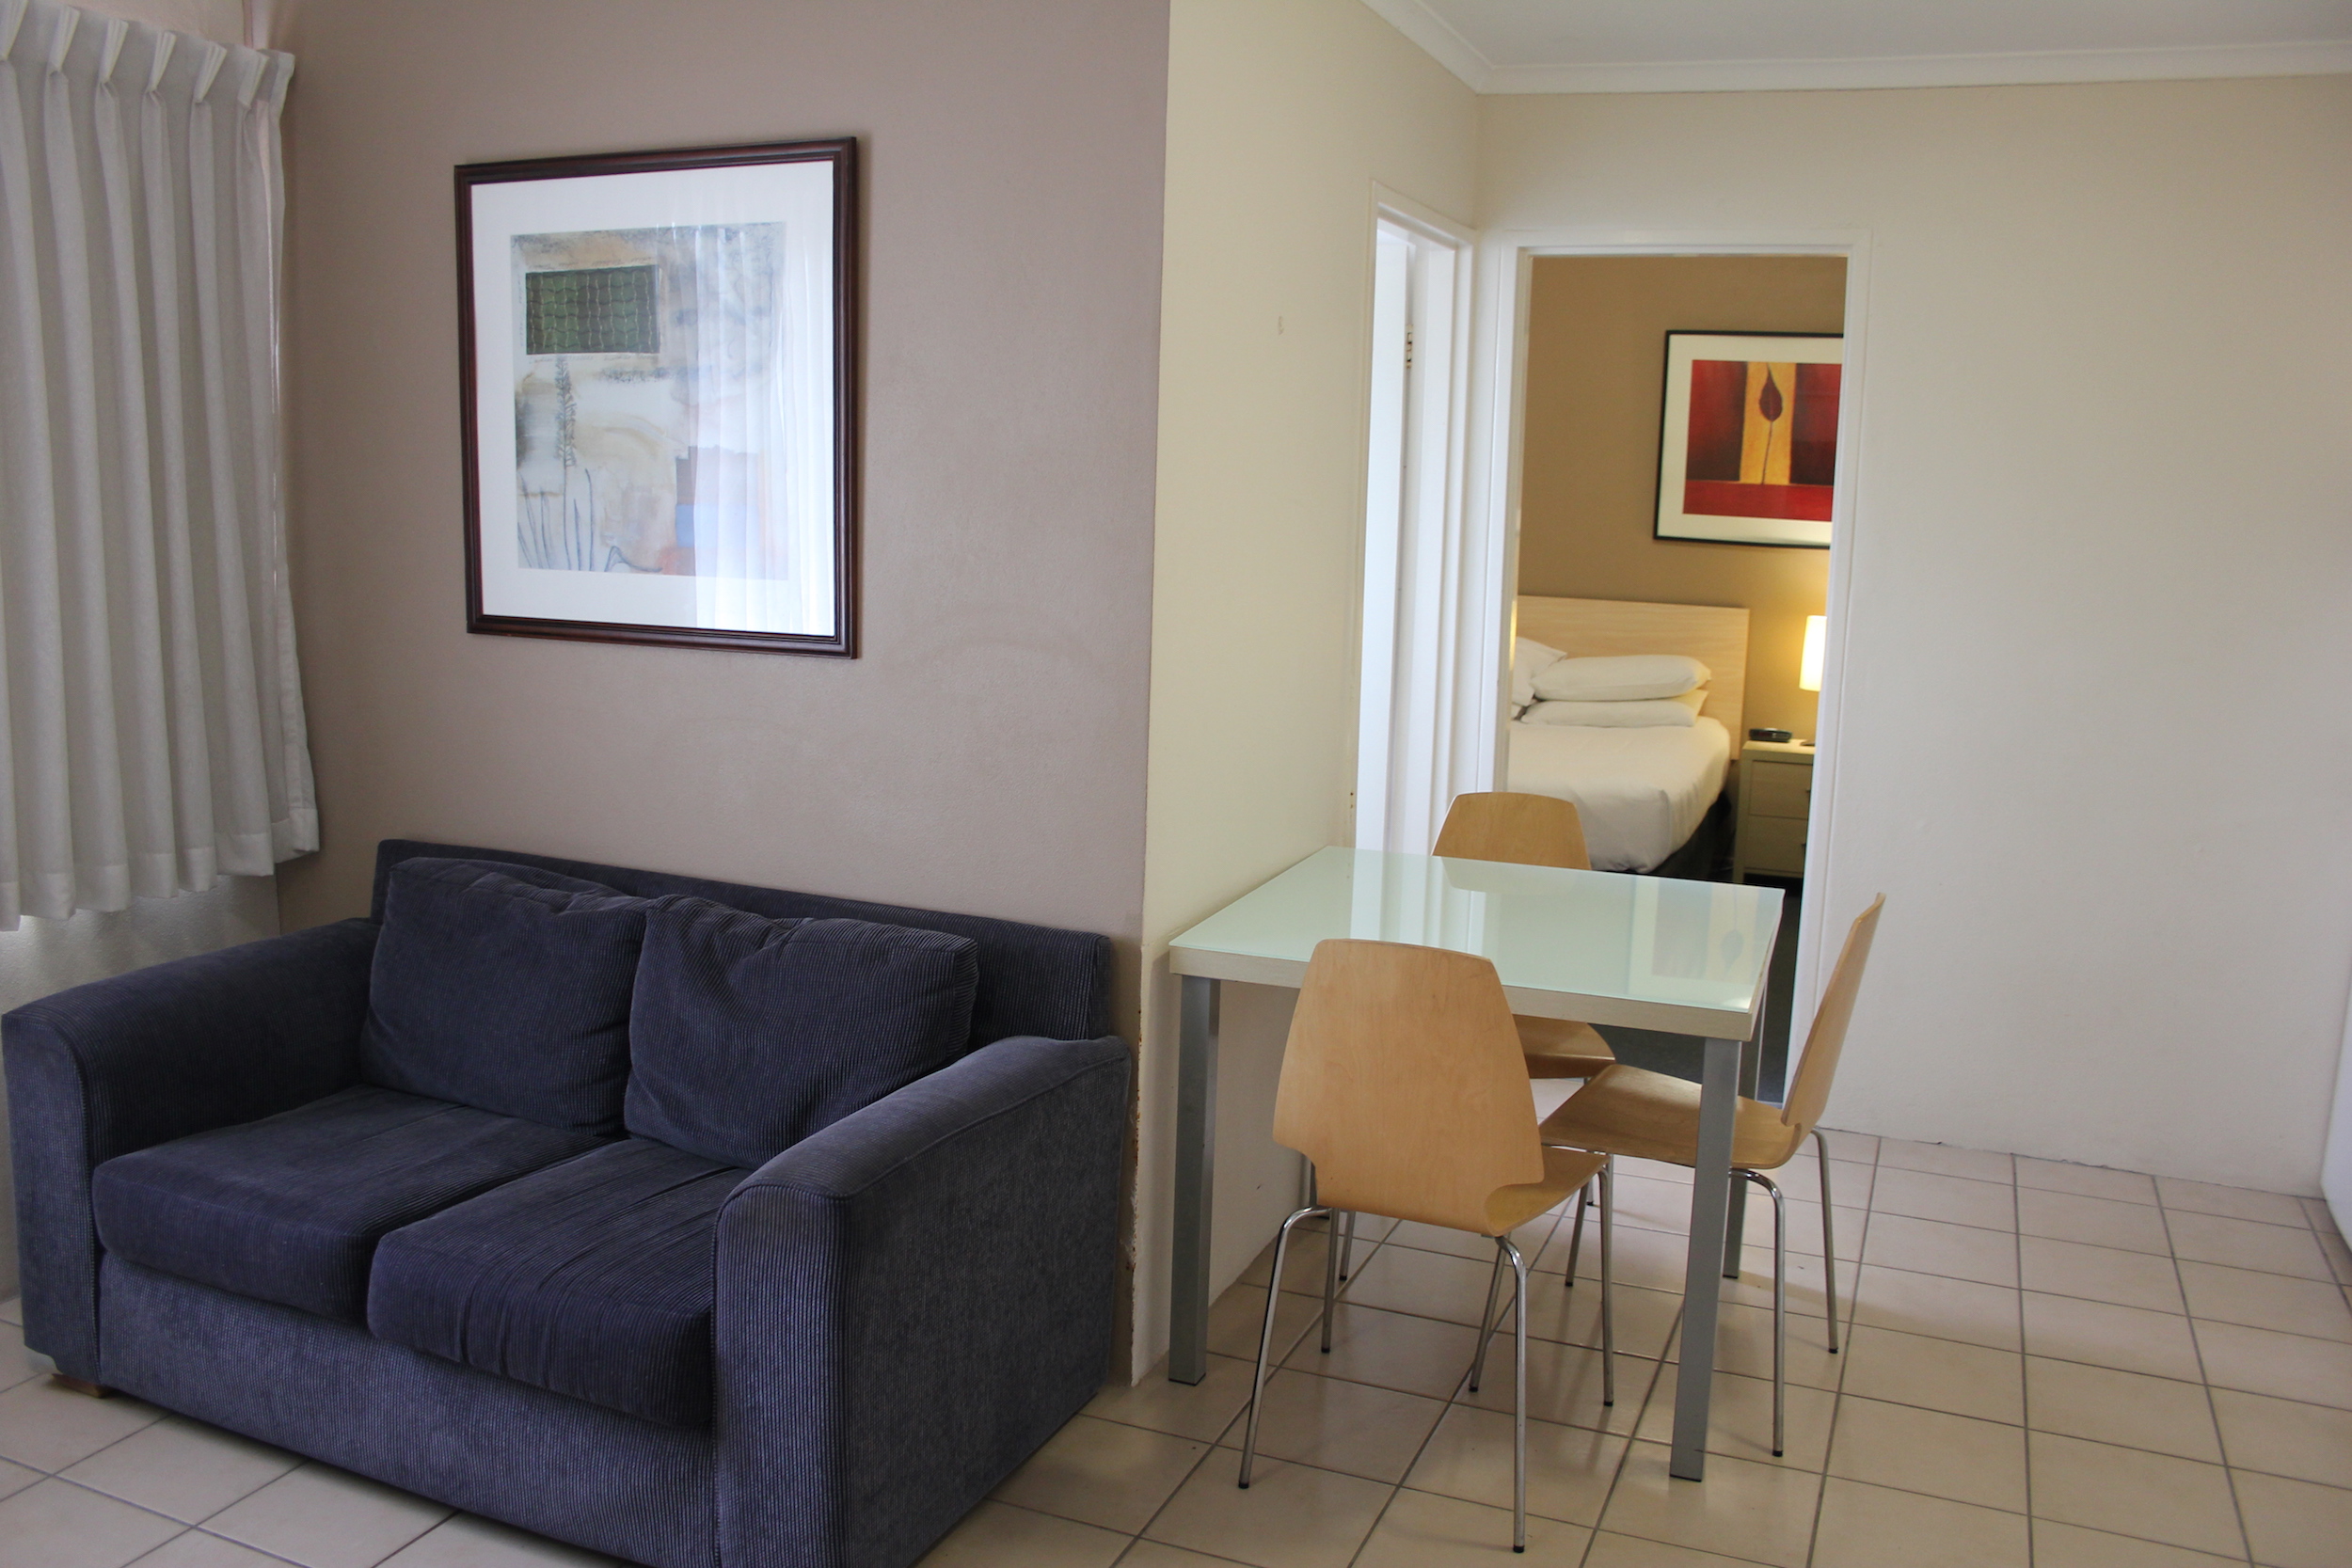 Best Western Ipswich Accommodation - Family Room